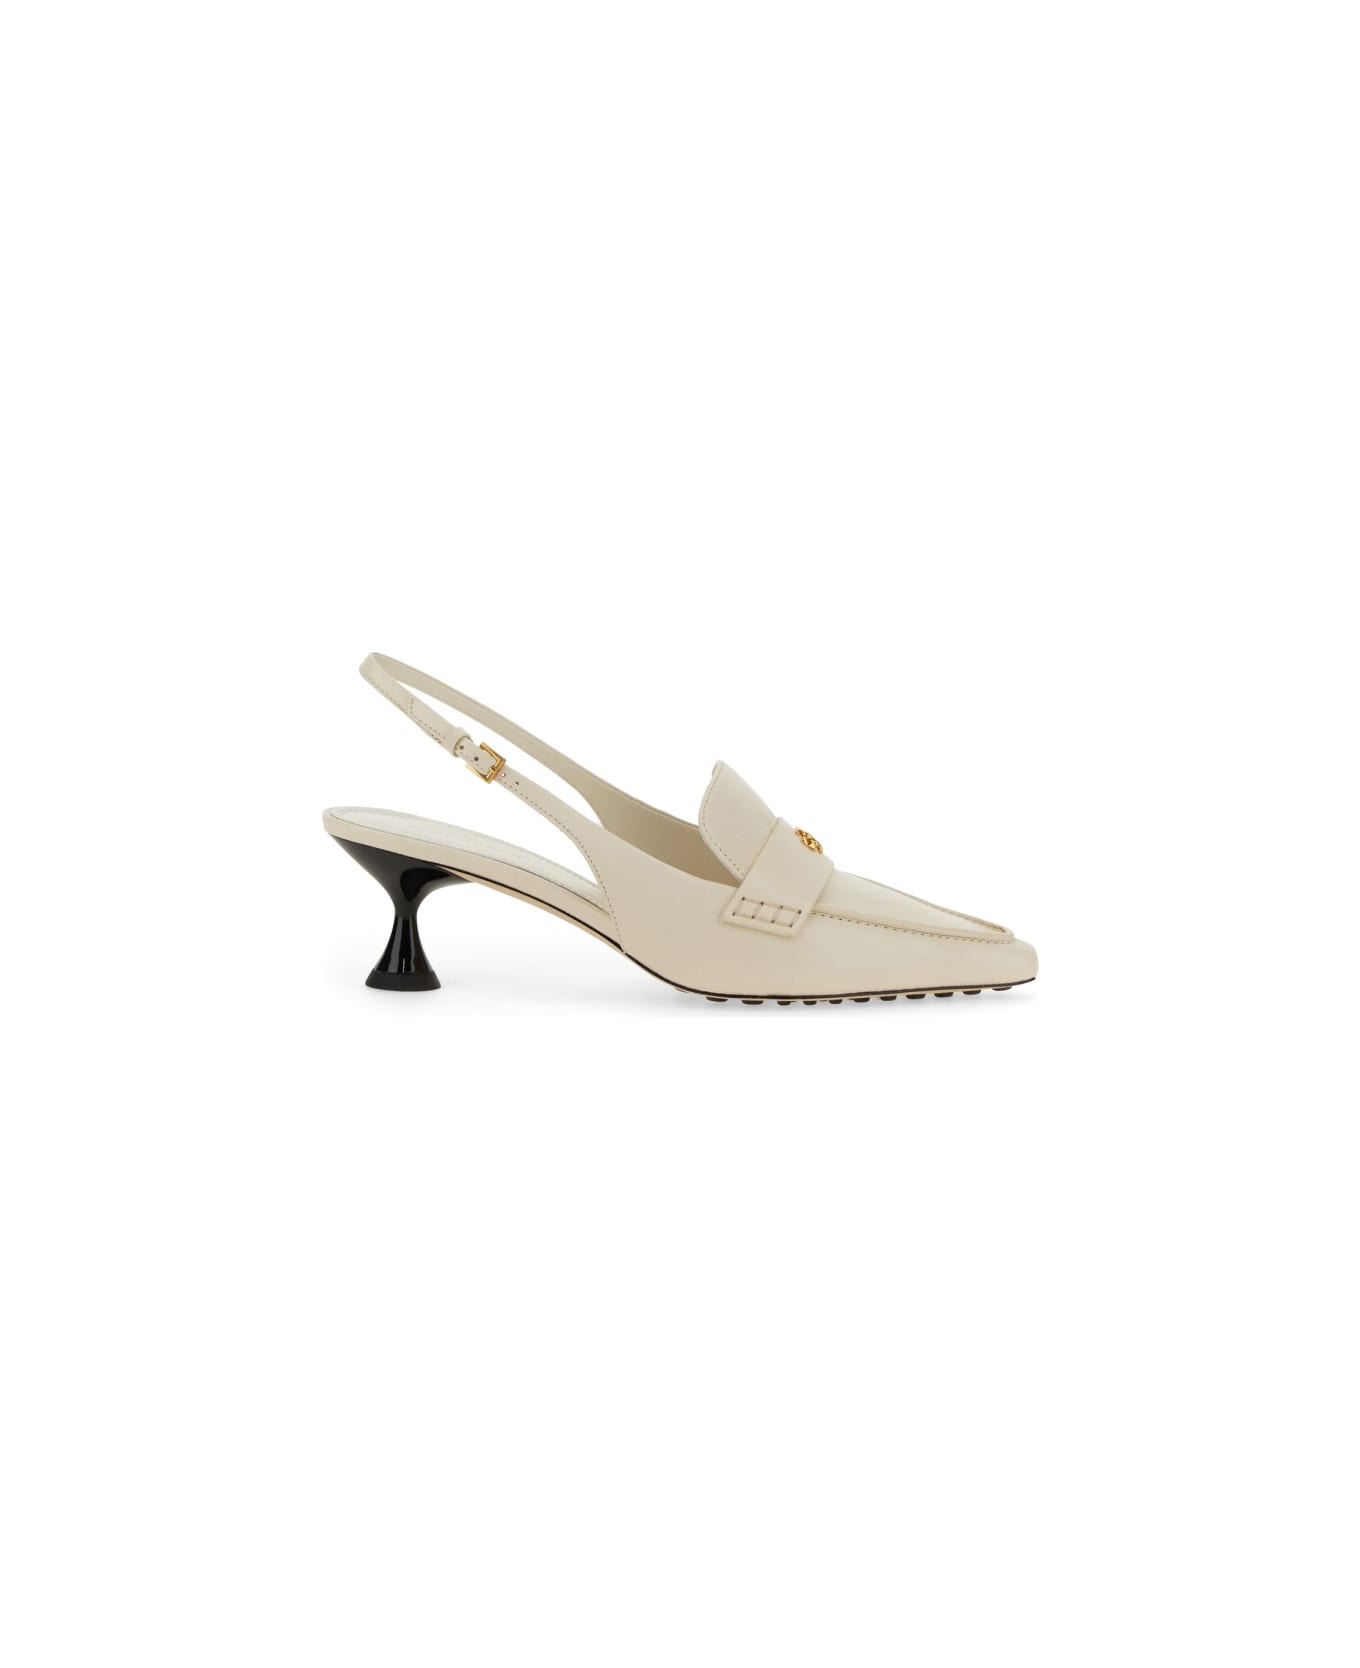 Tory Burch Leather Sandal - IVORY